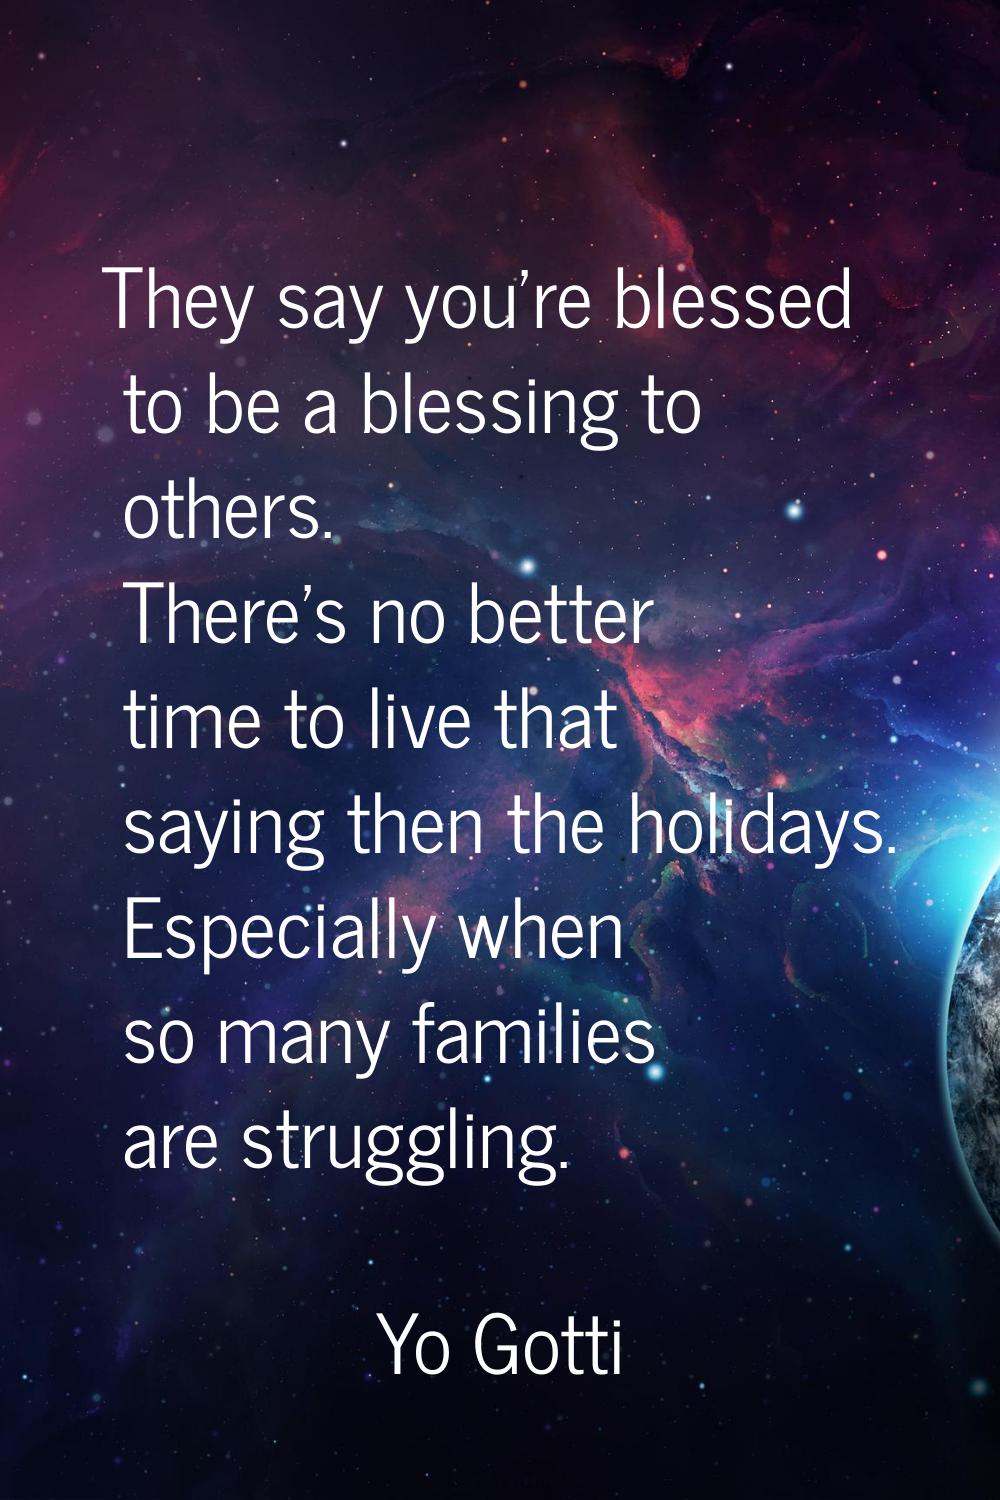 They say you're blessed to be a blessing to others. There's no better time to live that saying then